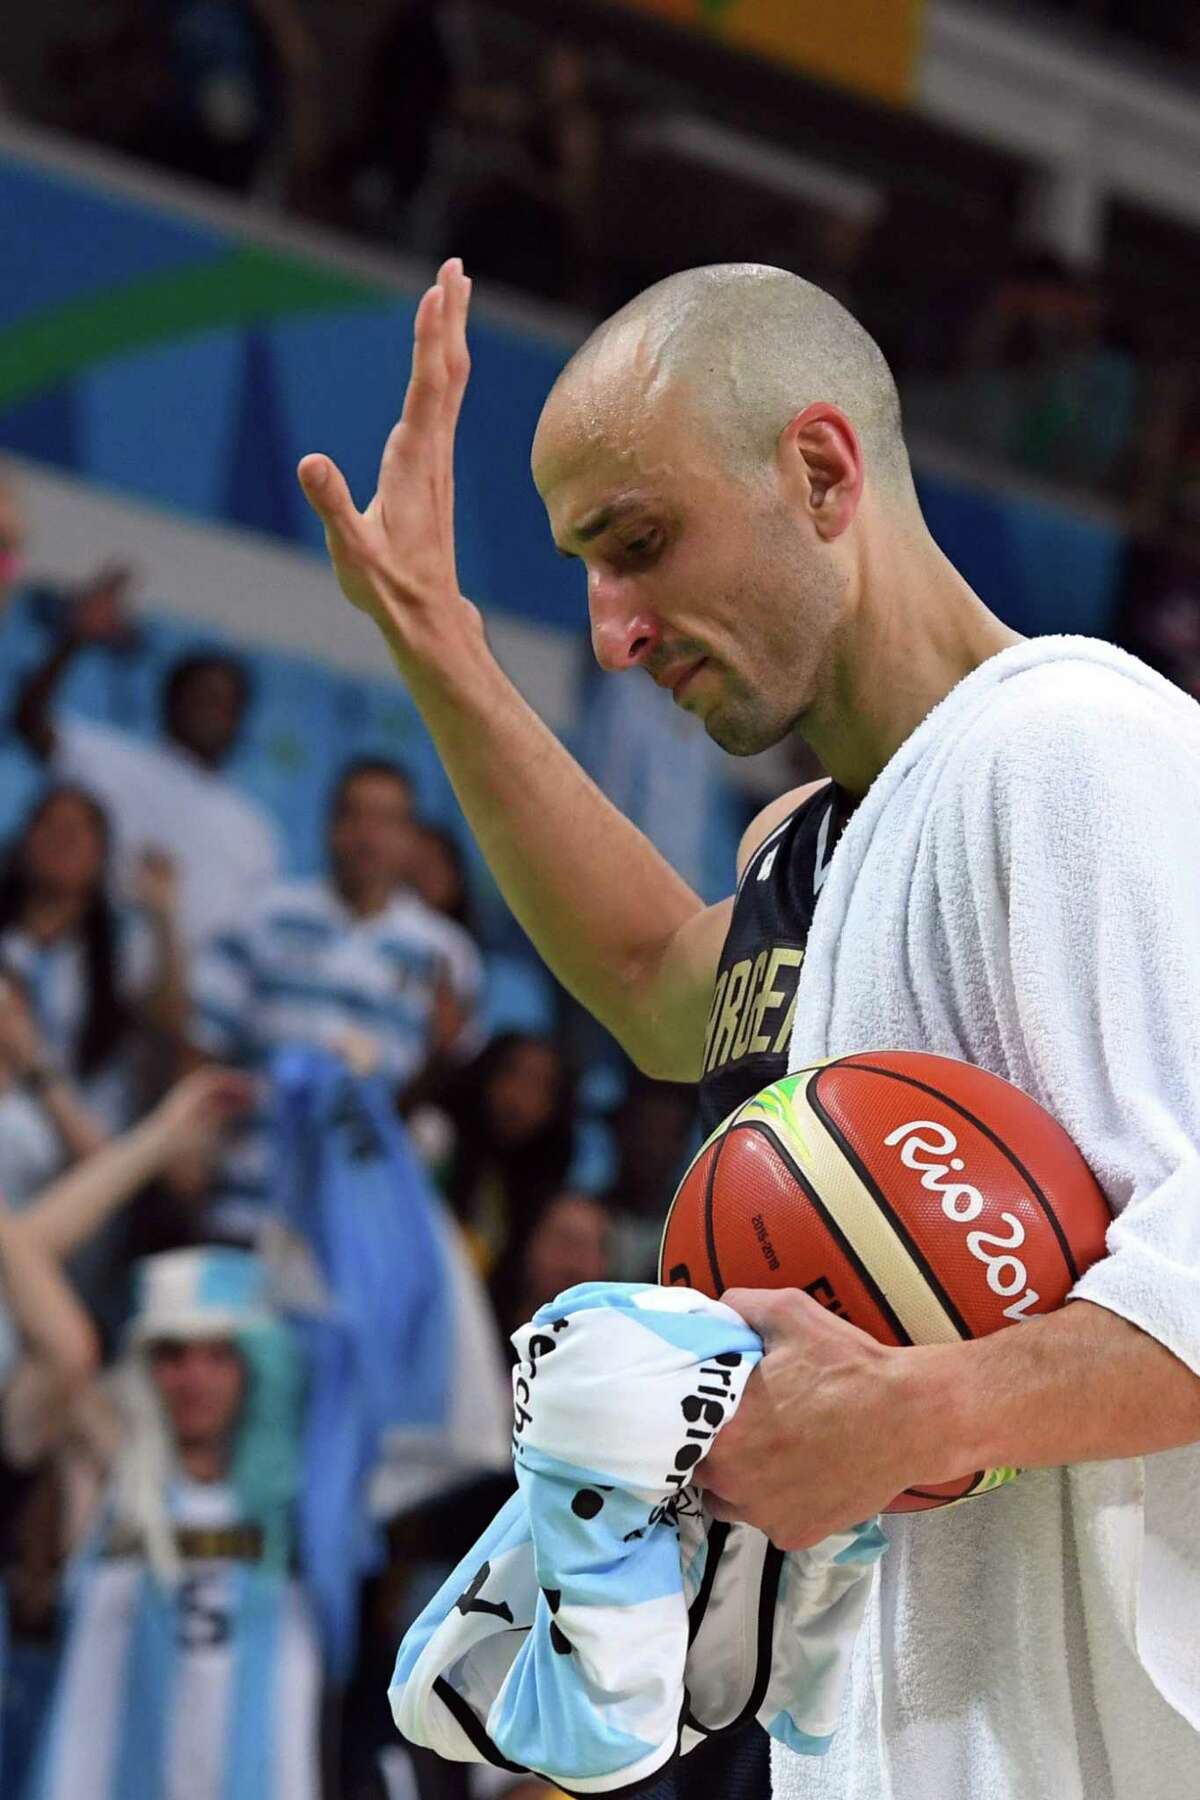 Manu Ginobili waves to fans after Argentina was eliminated from the Rio Olympics tournament.